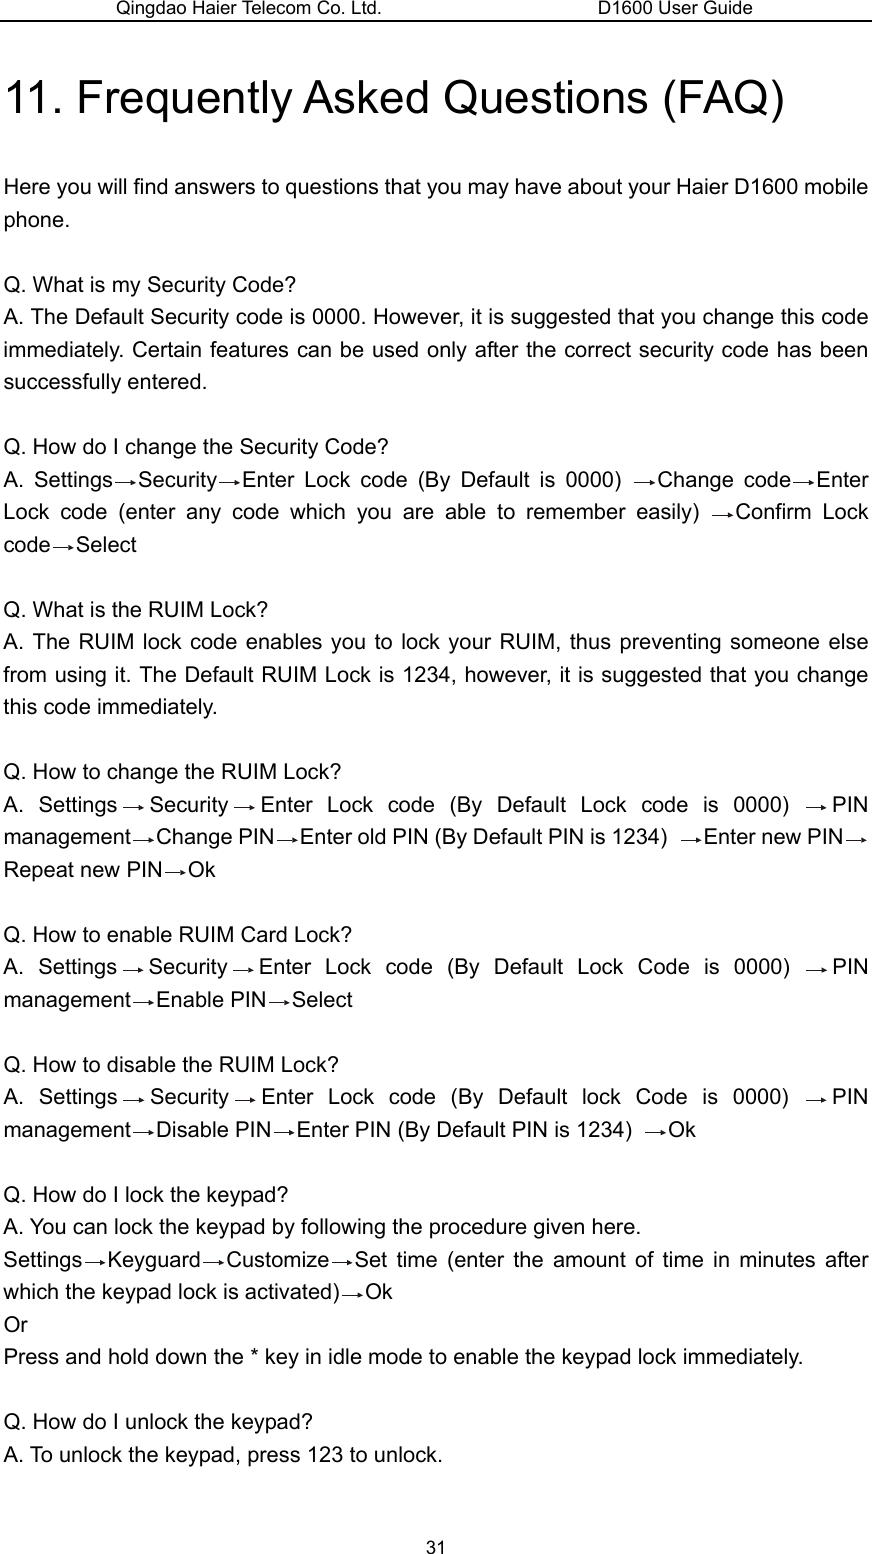 Qingdao Haier Telecom Co. Ltd.                       D1600 User Guide 11. Frequently Asked Questions (FAQ) Here you will find answers to questions that you may have about your Haier D1600 mobile phone.   Q. What is my Security Code? A. The Default Security code is 0000. However, it is suggested that you change this code immediately. Certain features can be used only after the correct security code has been successfully entered.  Q. How do I change the Security Code? A. Settings Security Enter Lock code (By Default is 0000)  Change code Enter Lock code (enter any code which you are able to remember easily)  Confirm Lock code Select  Q. What is the RUIM Lock? A. The RUIM lock code enables you to lock your RUIM, thus preventing someone else from using it. The Default RUIM Lock is 1234, however, it is suggested that you change this code immediately.  Q. How to change the RUIM Lock? A. Settings Security Enter Lock code (By Default Lock code is 0000)  PIN management Change PIN Enter old PIN (By Default PIN is 1234)  Enter new PIN  Repeat new PIN Ok   Q. How to enable RUIM Card Lock? A. Settings Security Enter Lock code (By Default Lock Code is 0000)  PIN management Enable PIN Select  Q. How to disable the RUIM Lock? A. Settings Security Enter Lock code (By Default lock Code is 0000)  PIN management Disable PIN Enter PIN (By Default PIN is 1234)  Ok  Q. How do I lock the keypad? A. You can lock the keypad by following the procedure given here. Settings Keyguard Customize Set time (enter the amount of time in minutes after which the keypad lock is activated) Ok Or Press and hold down the * key in idle mode to enable the keypad lock immediately.  Q. How do I unlock the keypad? A. To unlock the keypad, press 123 to unlock.  31 